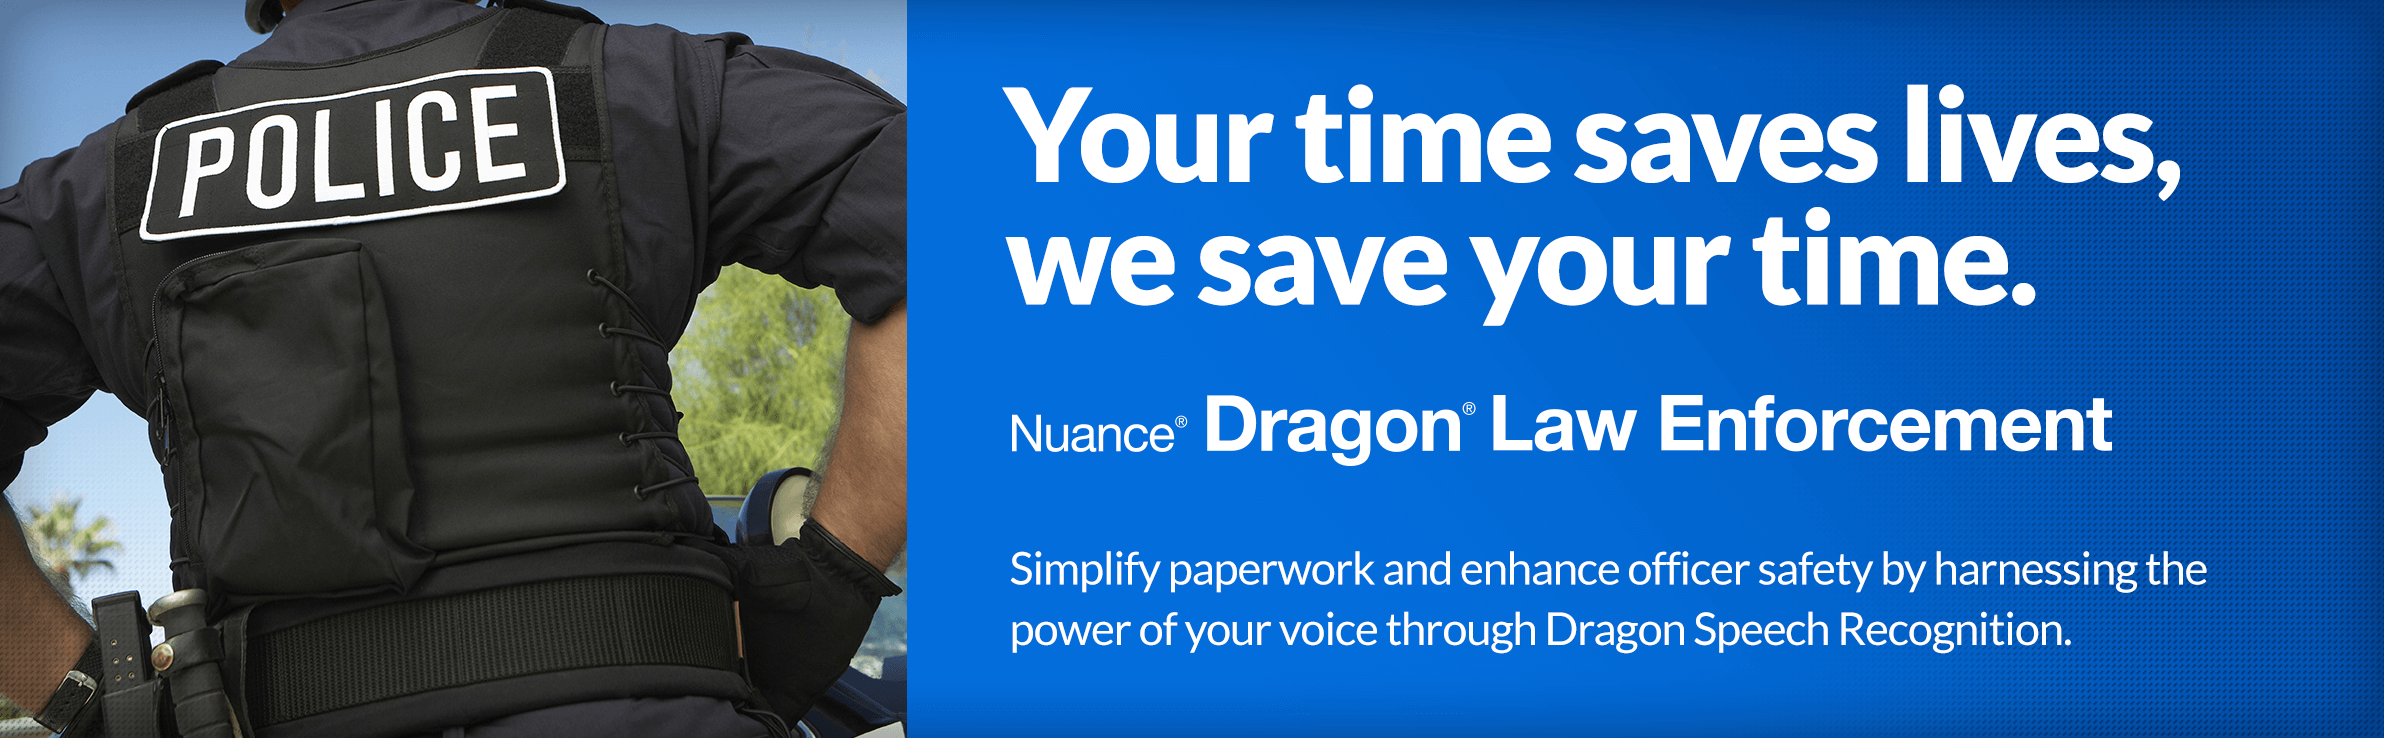 Your time saves lives, we save your time. Dragon Law Enforcement - Simplify paperwork and enhance officer safety by harnessing the power of your voice through Dragon Speech Recognition.